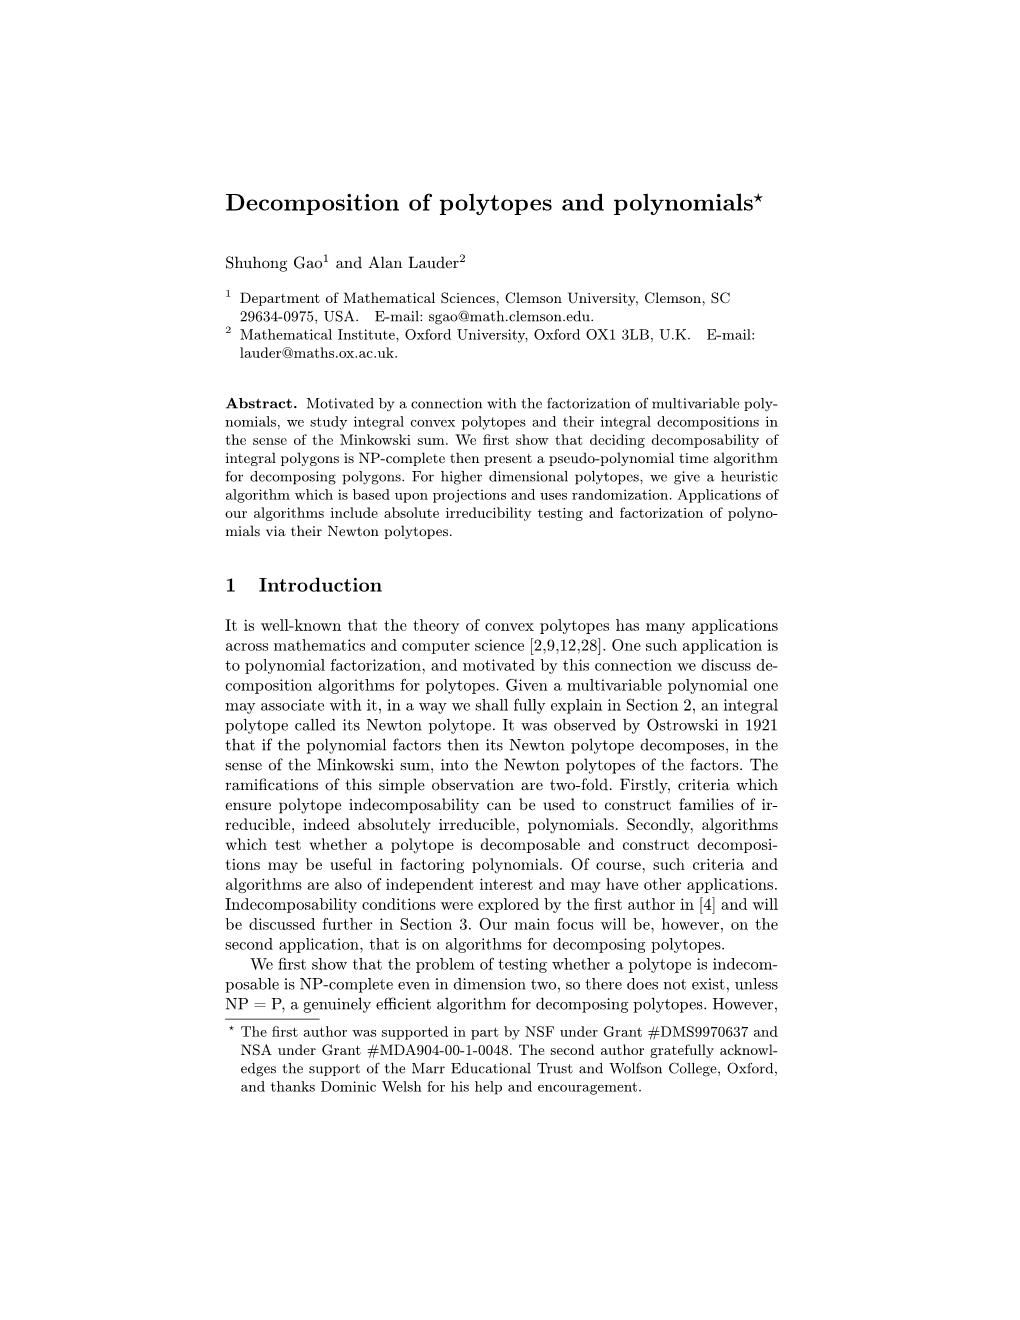 Decomposition of Polytopes and Polynomials?